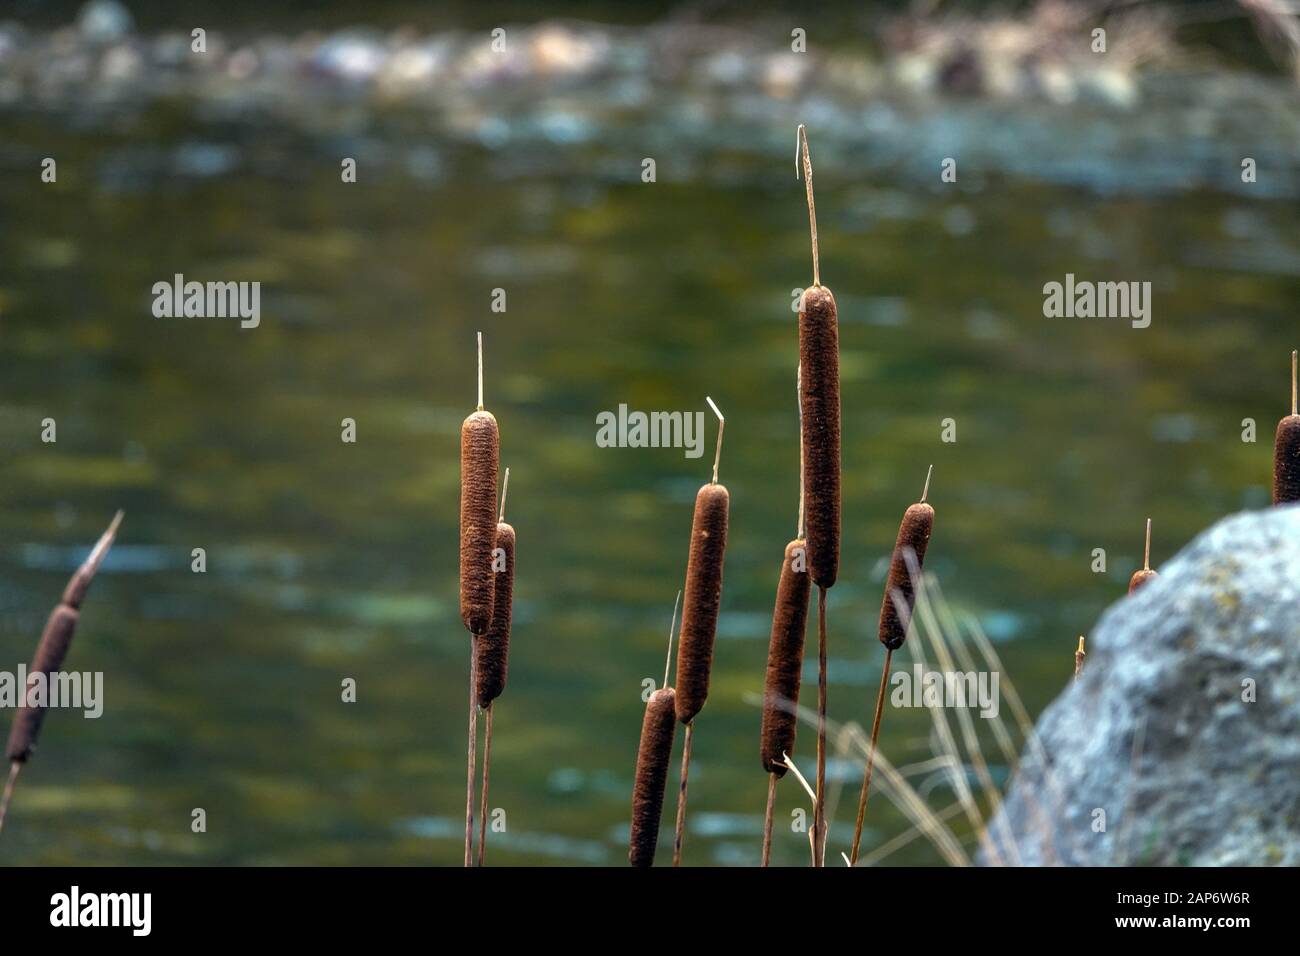 Bulrush, cattails by Ariege river, France Stock Photo